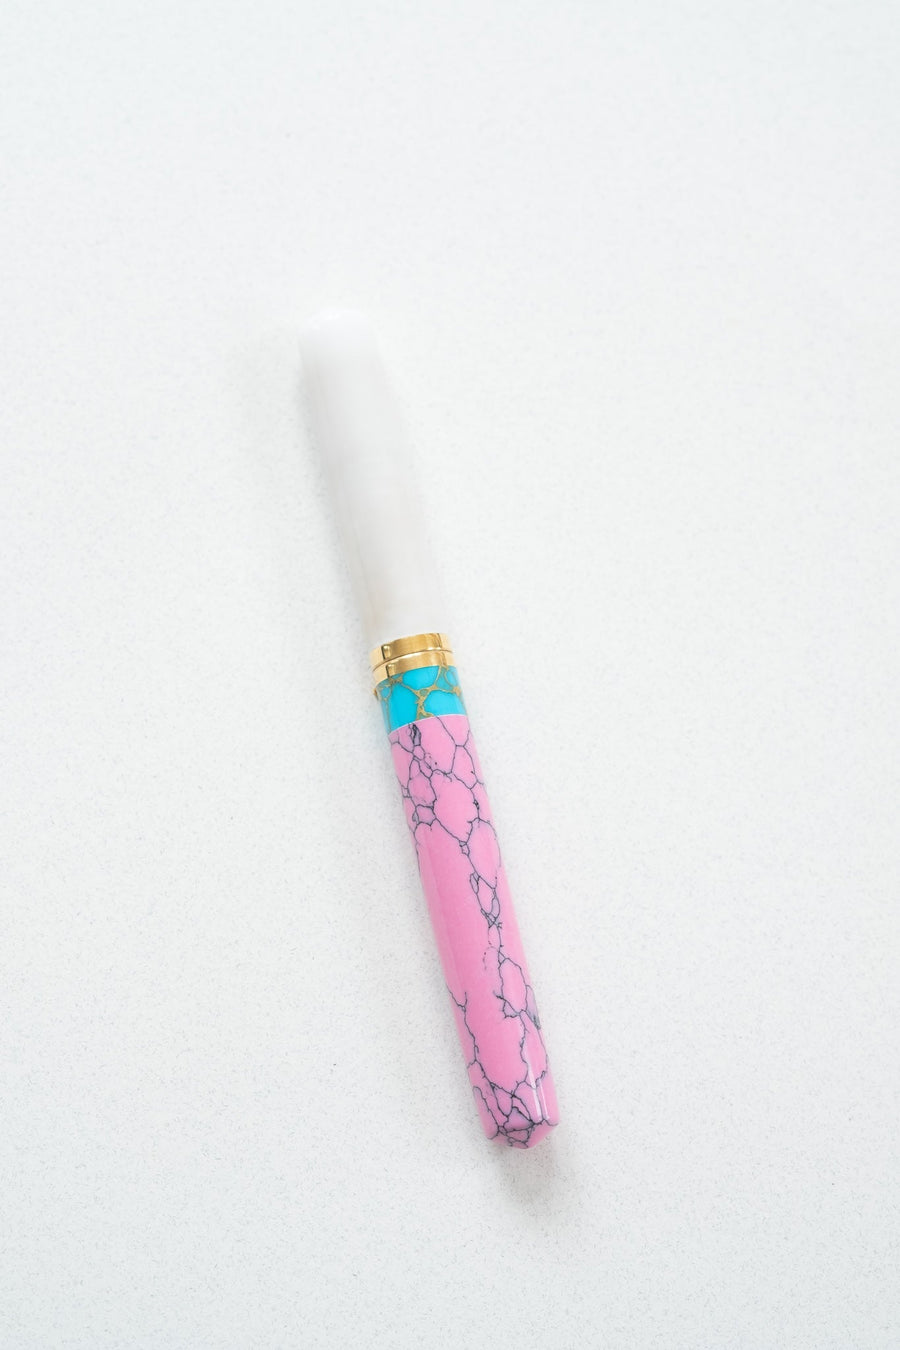 Pink + Turquoise Studio Fountain Pen with a flexible nib with the white lid on